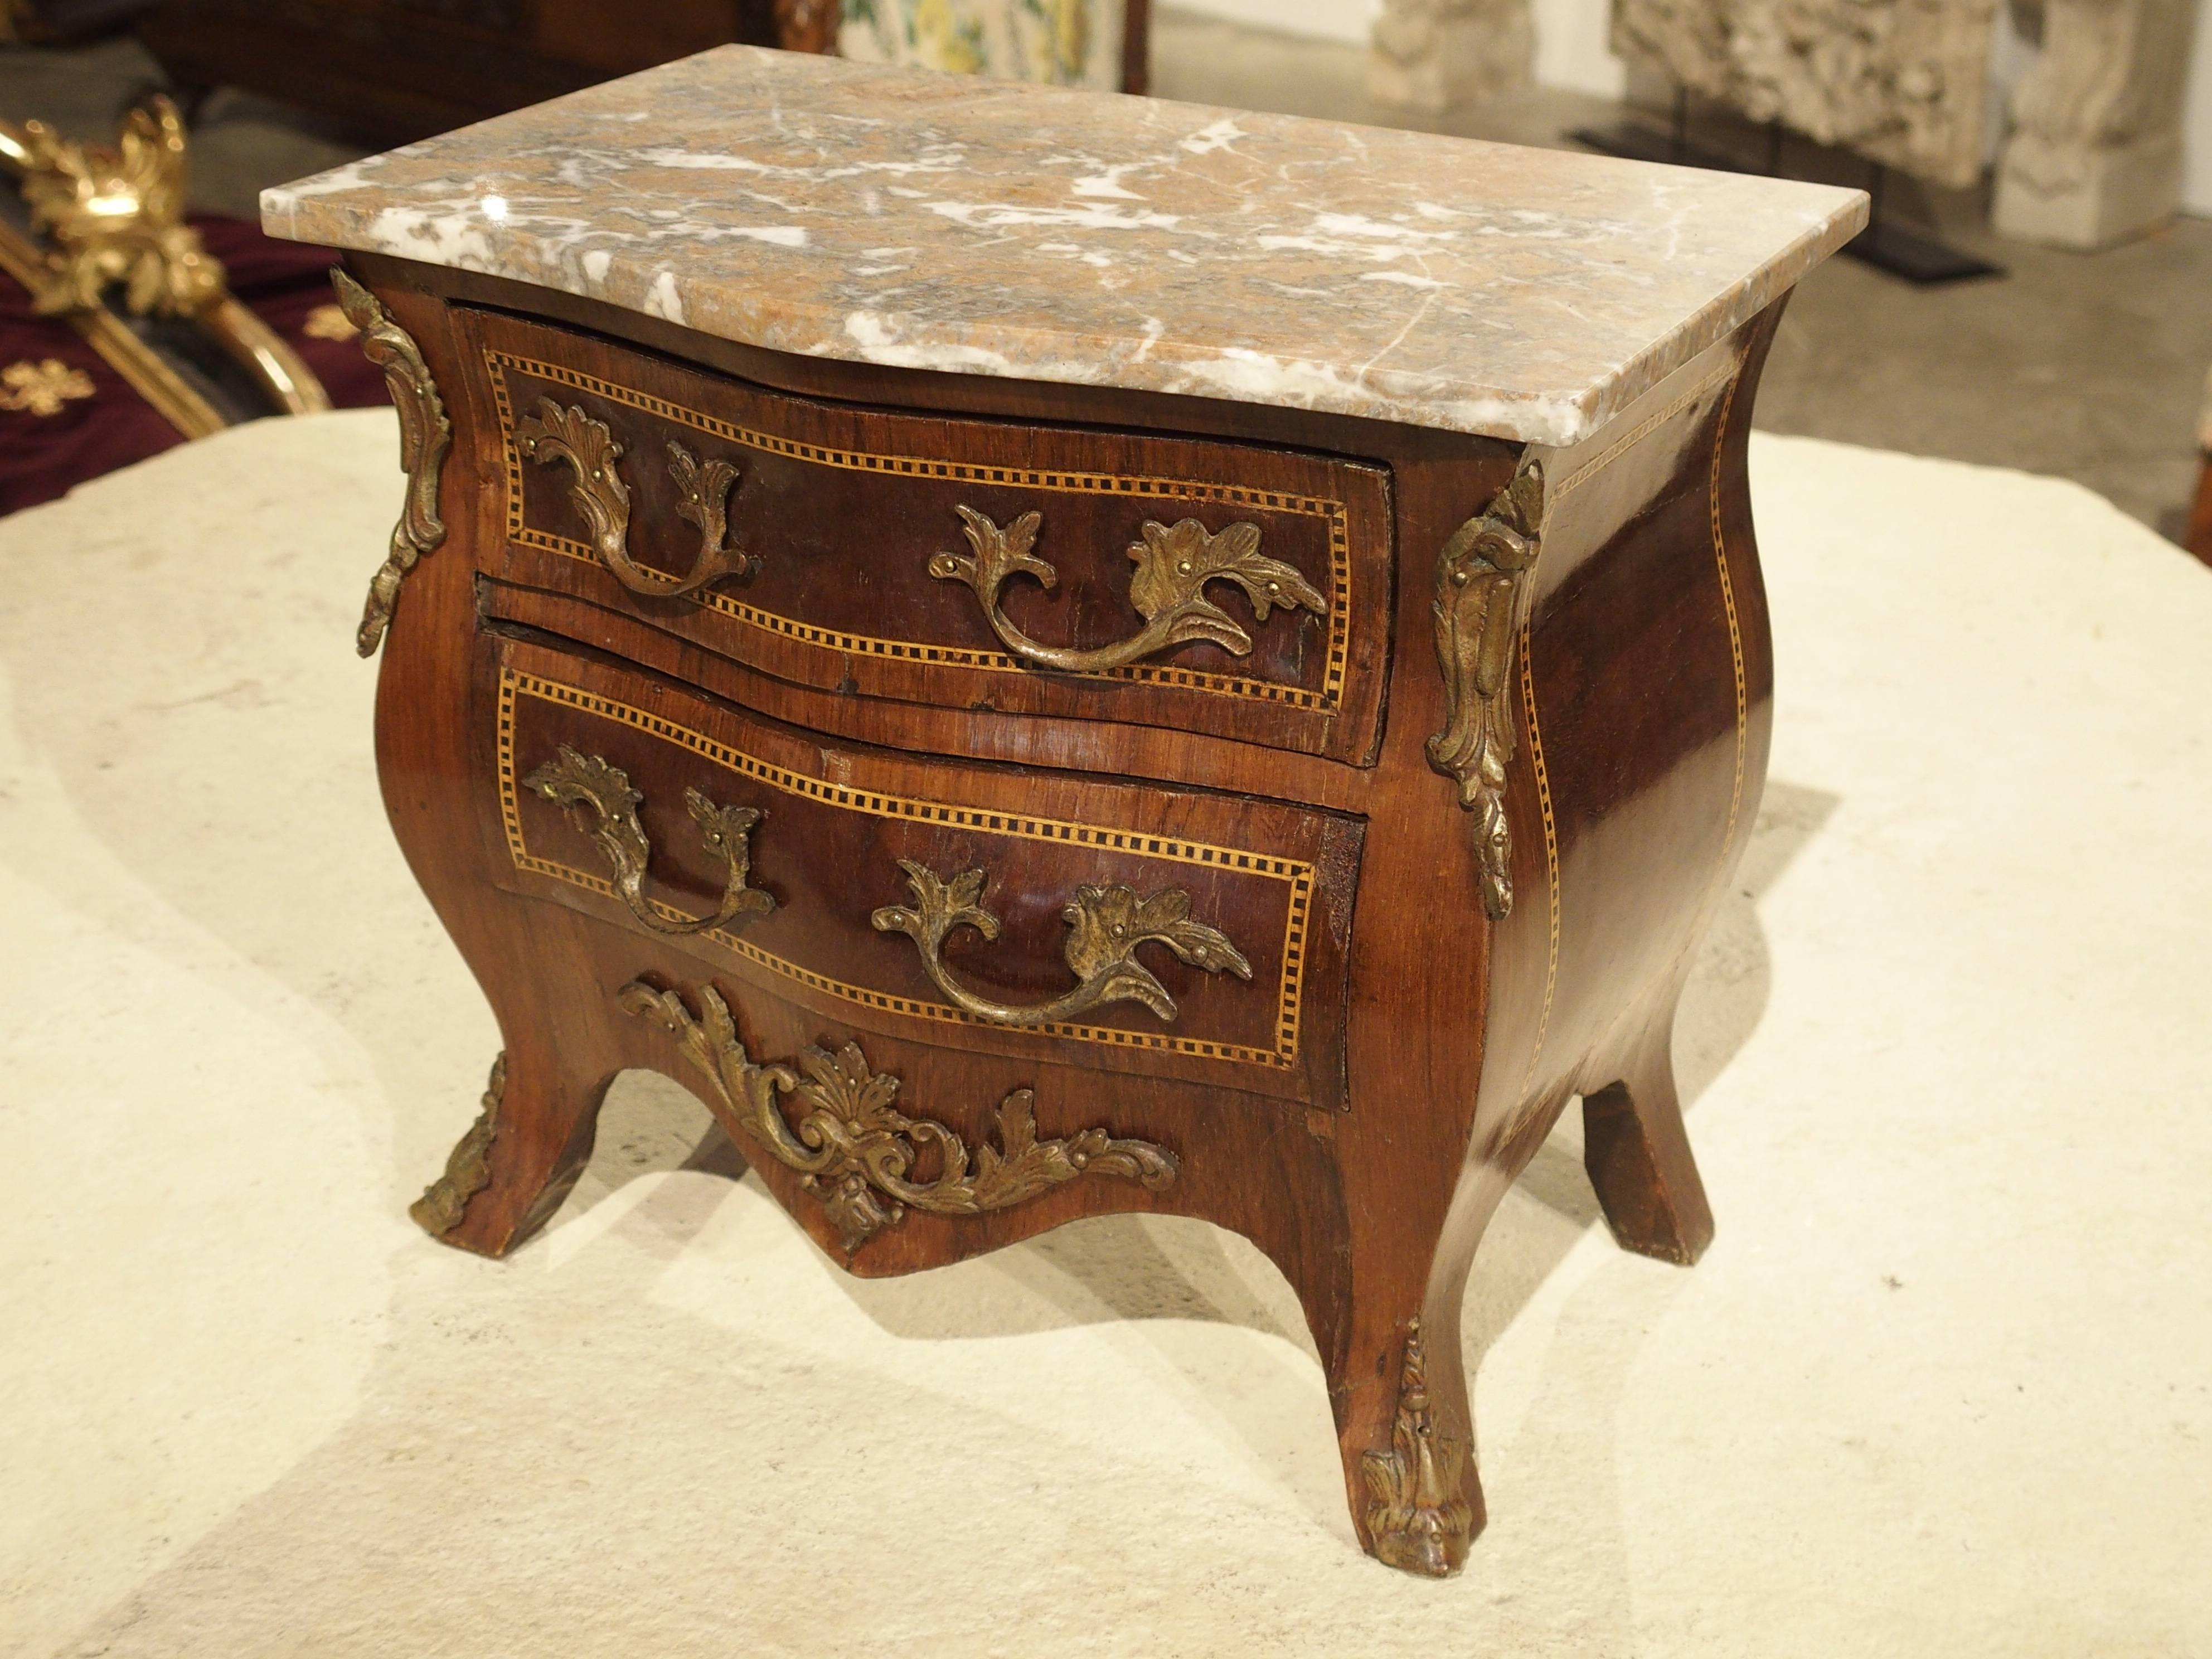 Bronze Miniature Antique Chest of Drawers from France, circa 1880